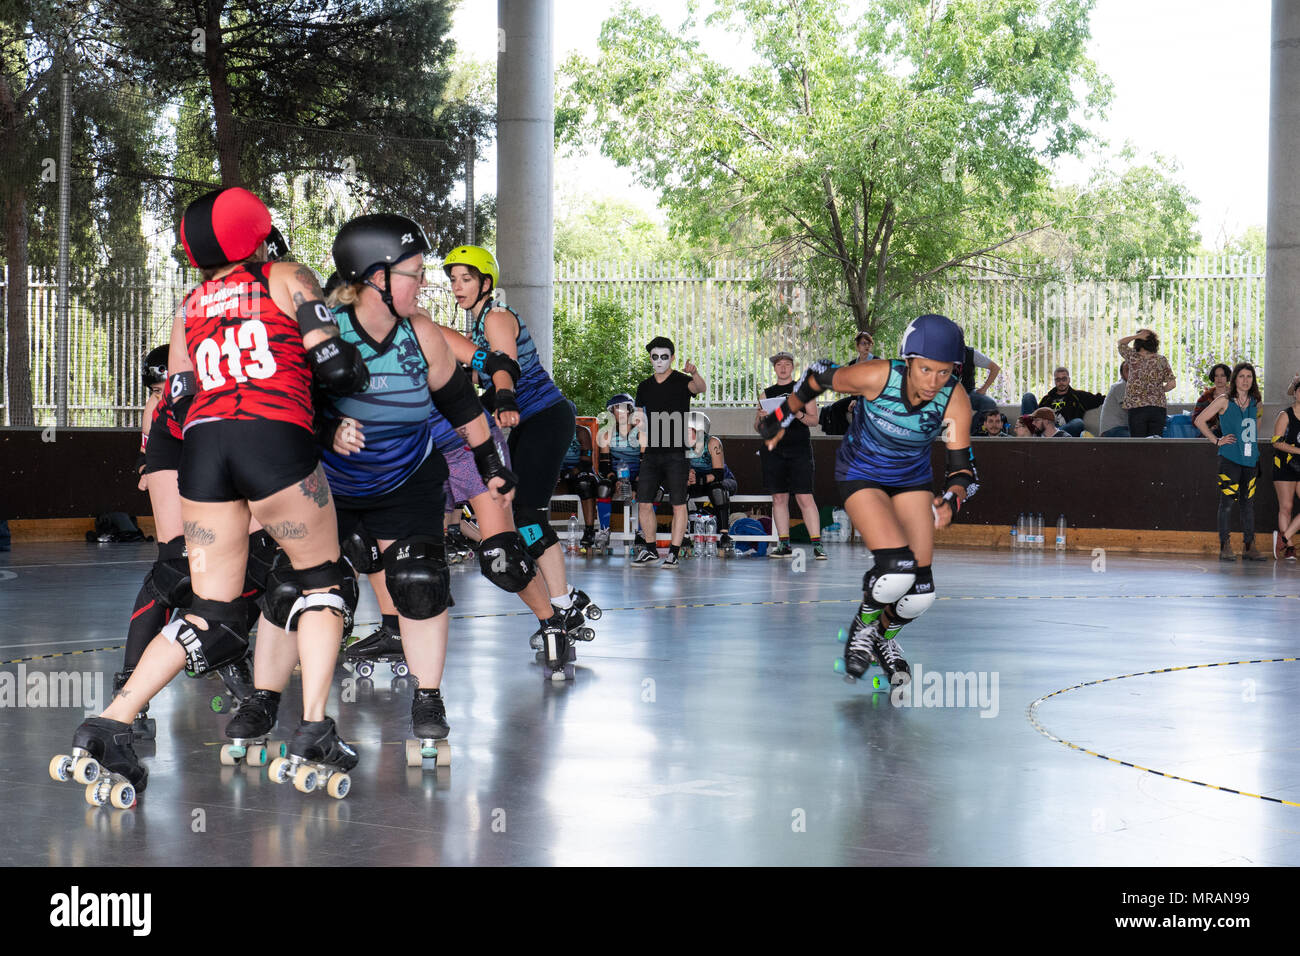 Madrid, Spain. 26th May, 2018. Jammer of Roller Derby Bordeaux, #123 Peak  Assaut, escaping from the pack during the game against Roller Derby Madrid  B. © Valentin Sama-Rojo/Alamy Live News Stock Photo -